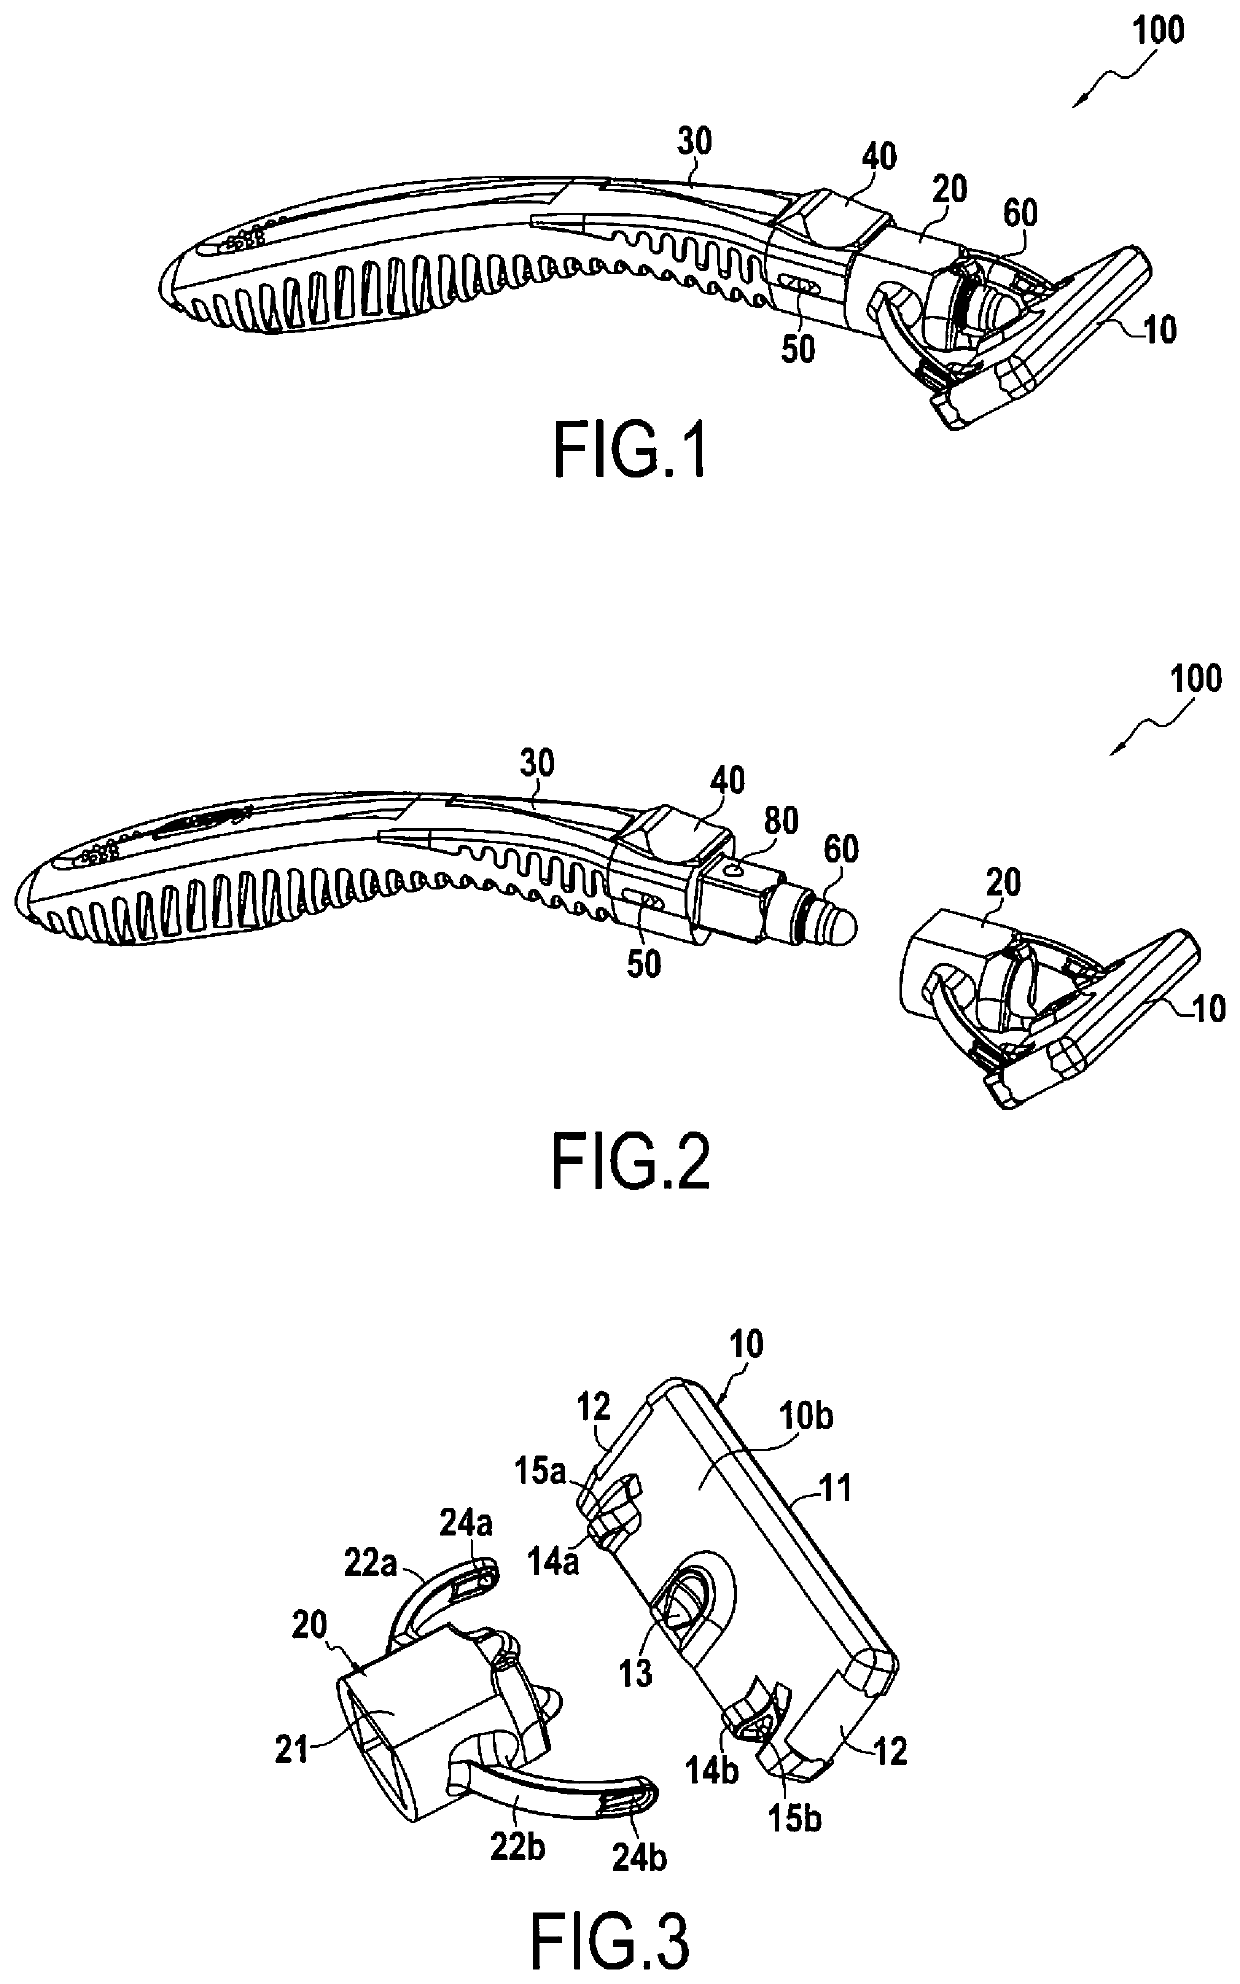 Razor handle, attachment adapter, and razor assembly